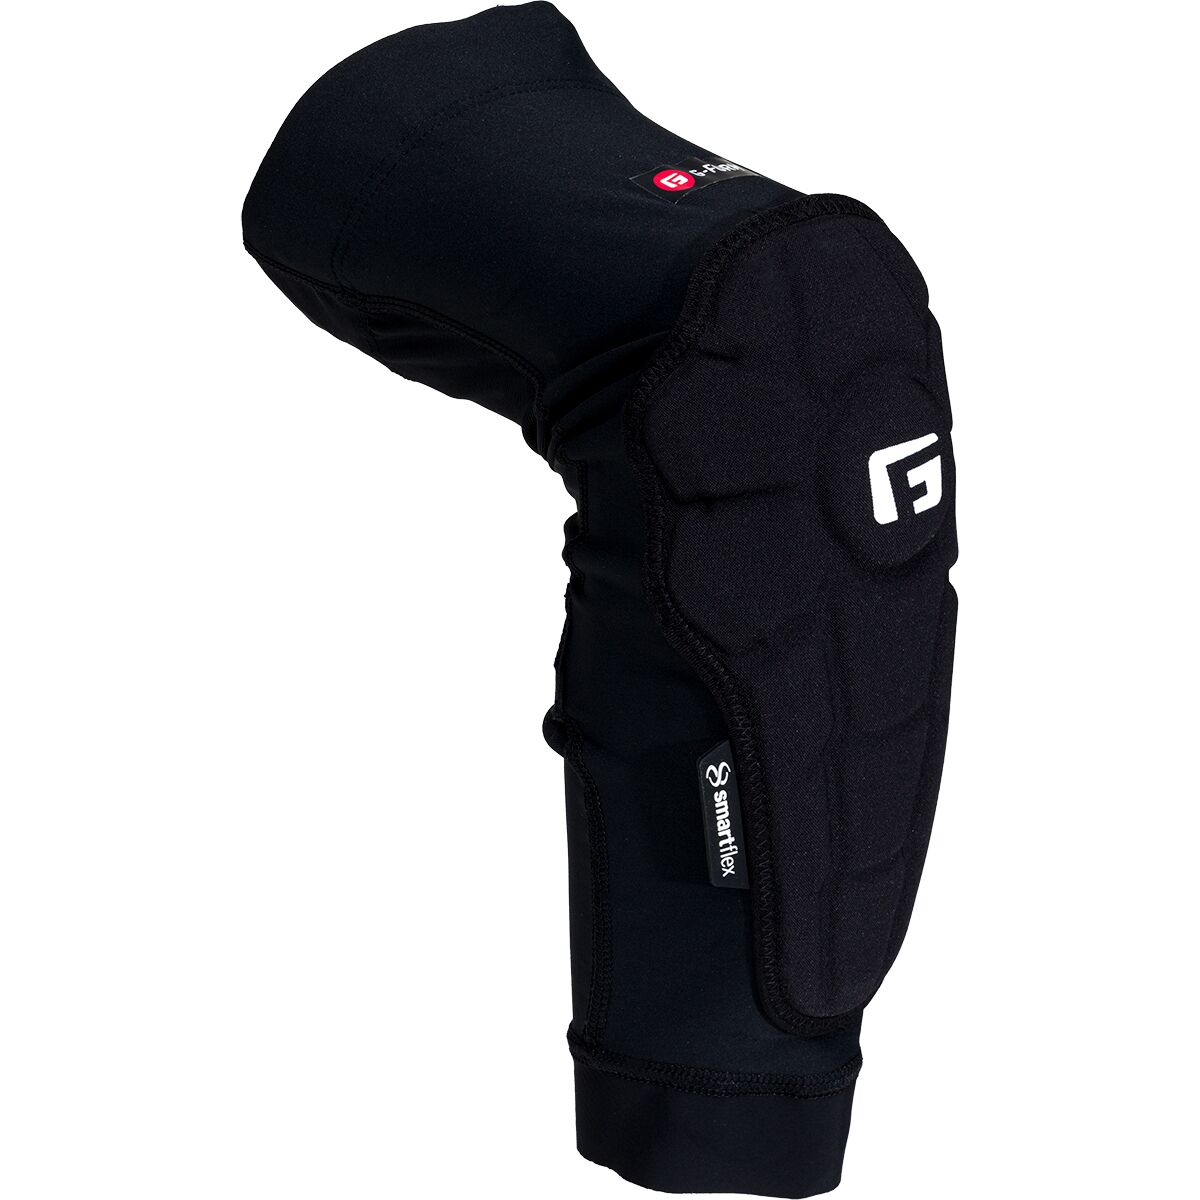 Photos - Protective Gear Set G-Form Pro-Rugged 2 Elbow Guard 